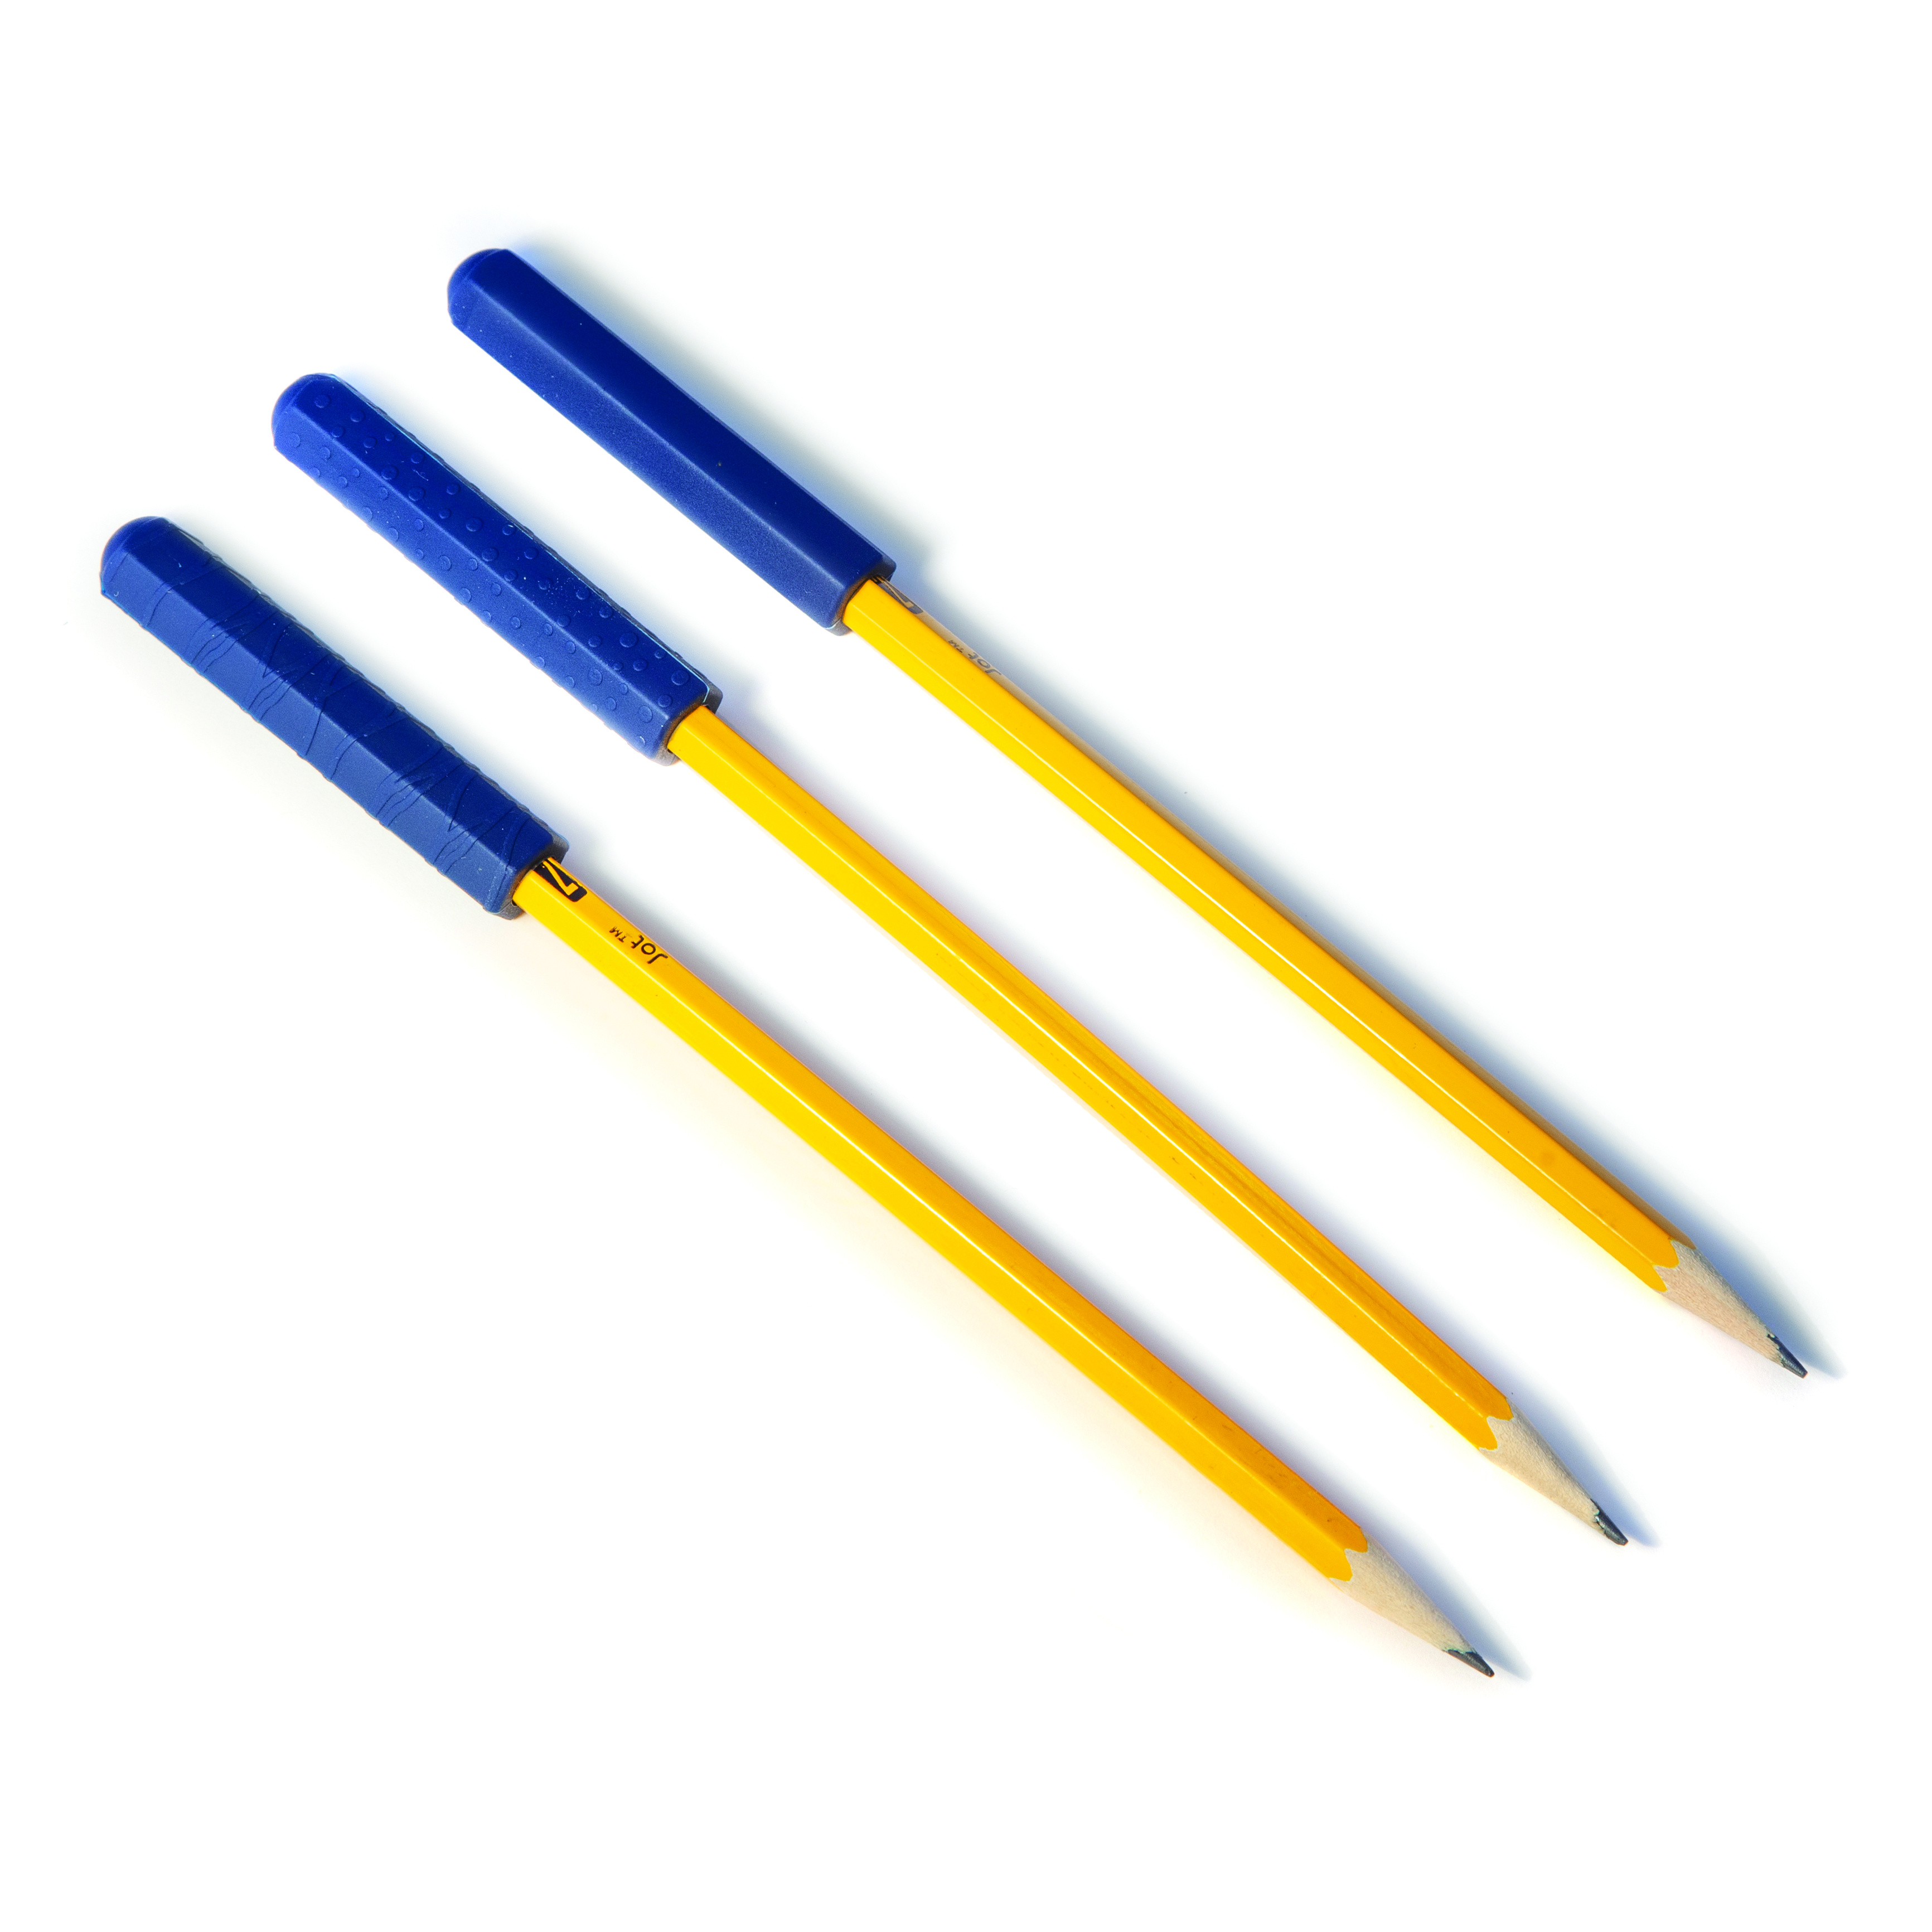 3 blue pencil toppers